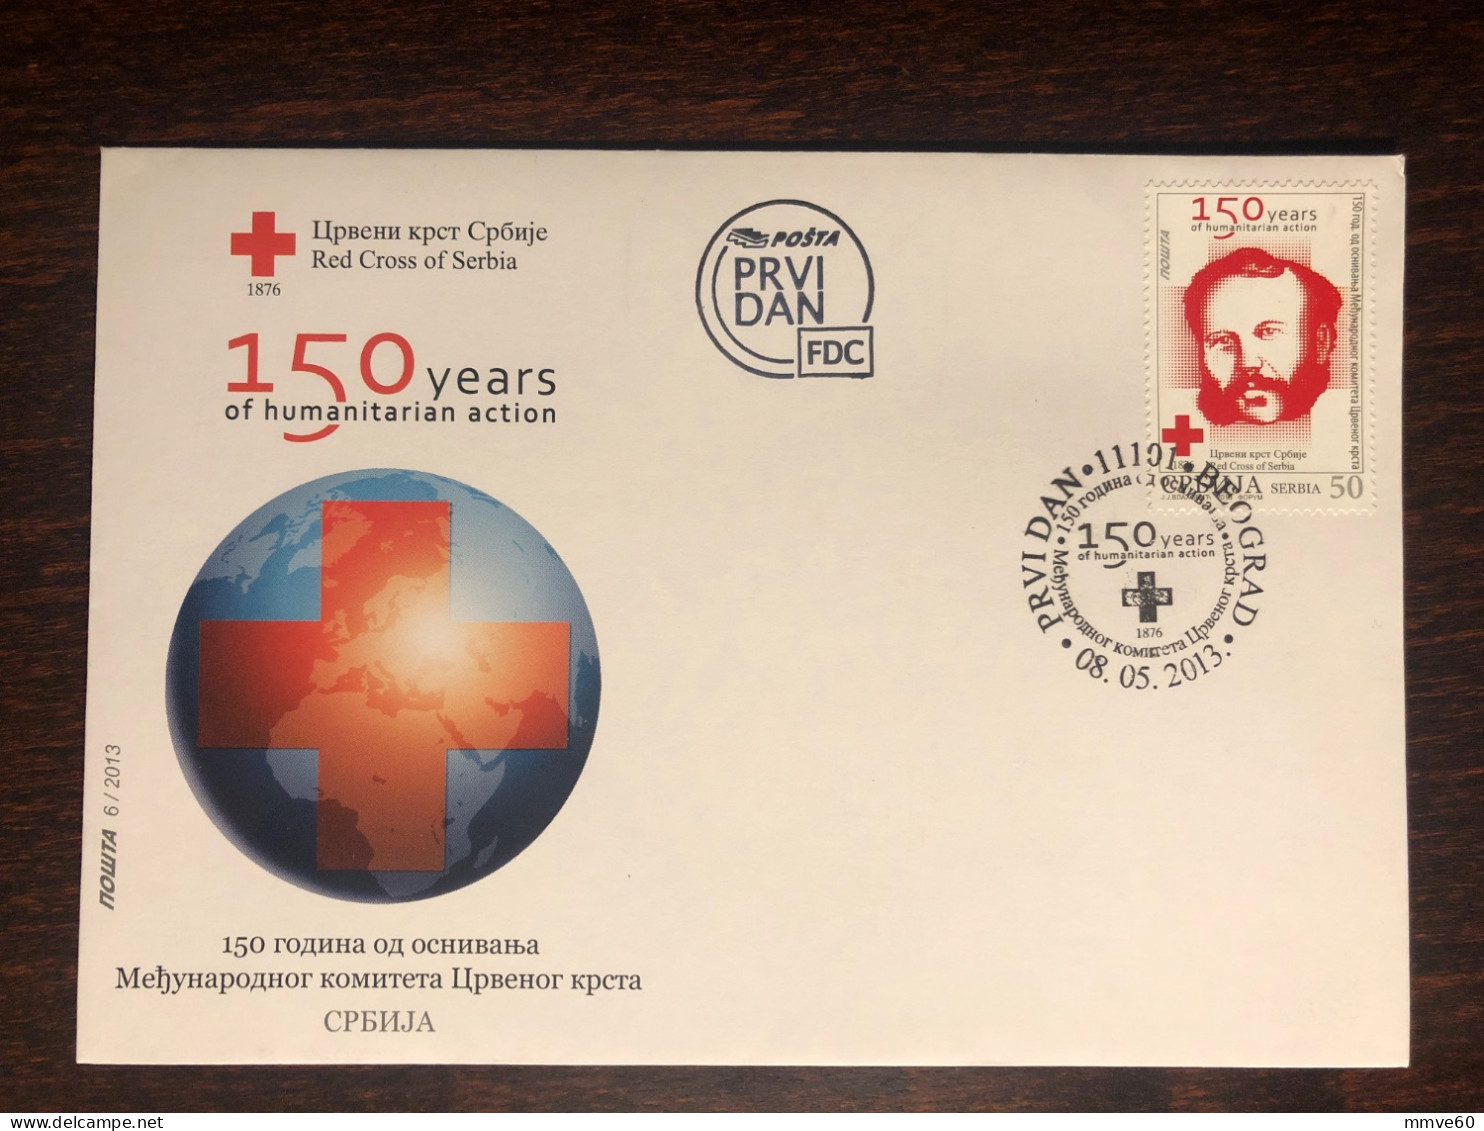 SERBIA FDC COVER 2013 YEAR RED CROSS DUNANT HEALTH MEDICINE STAMPS - Serbia